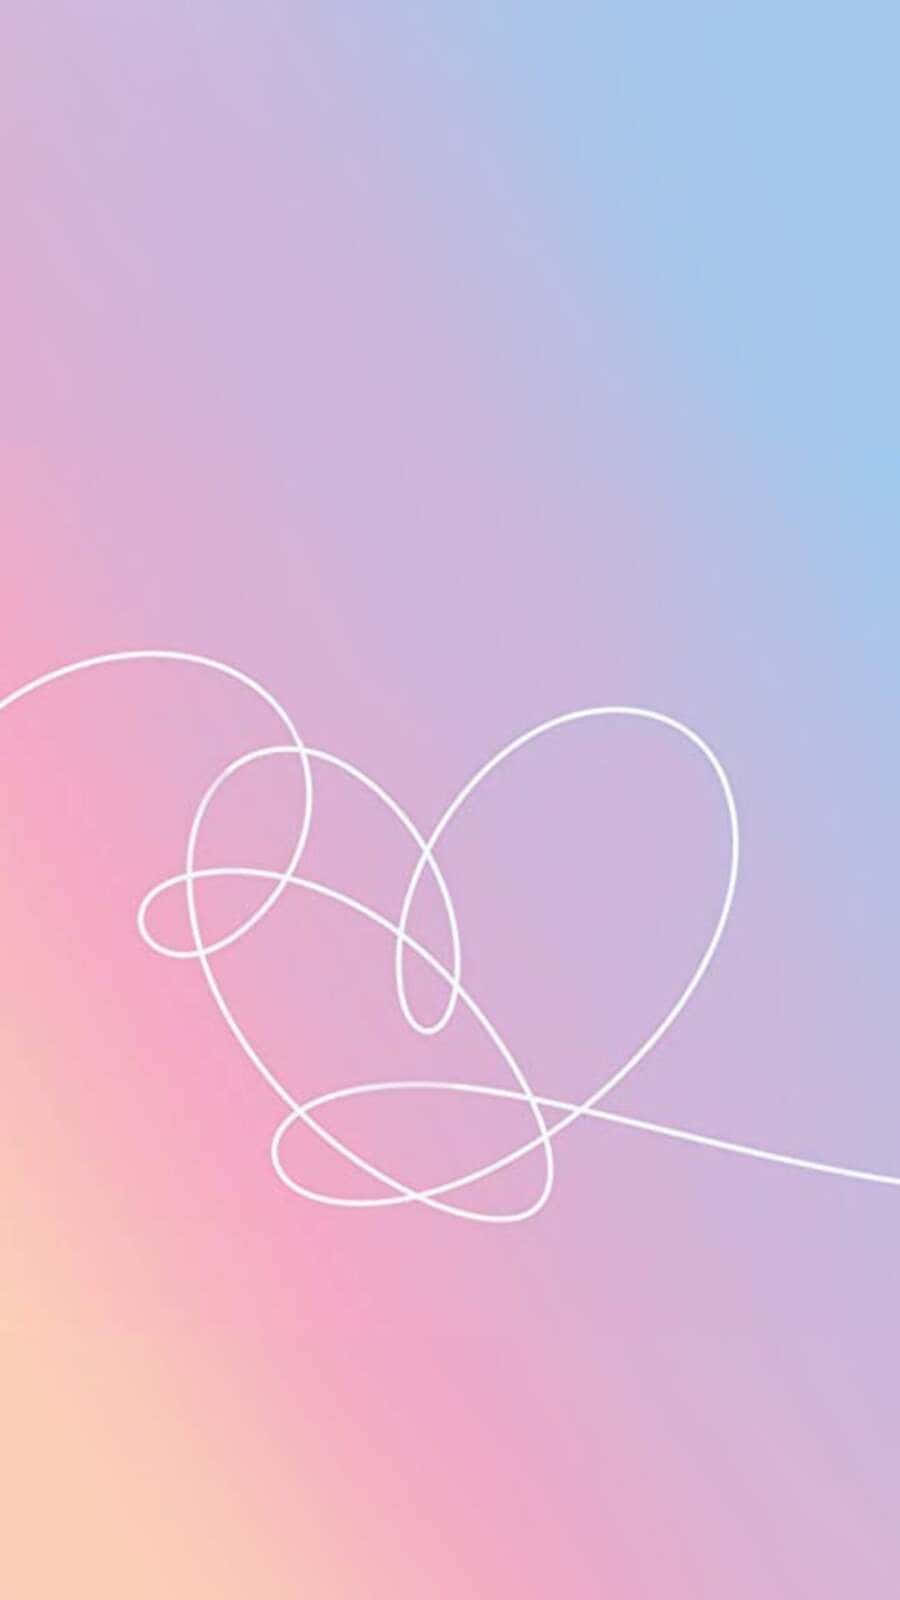 BTS Love Yourself Wallpaper: An Explosion of Colors and Emotions Wallpaper